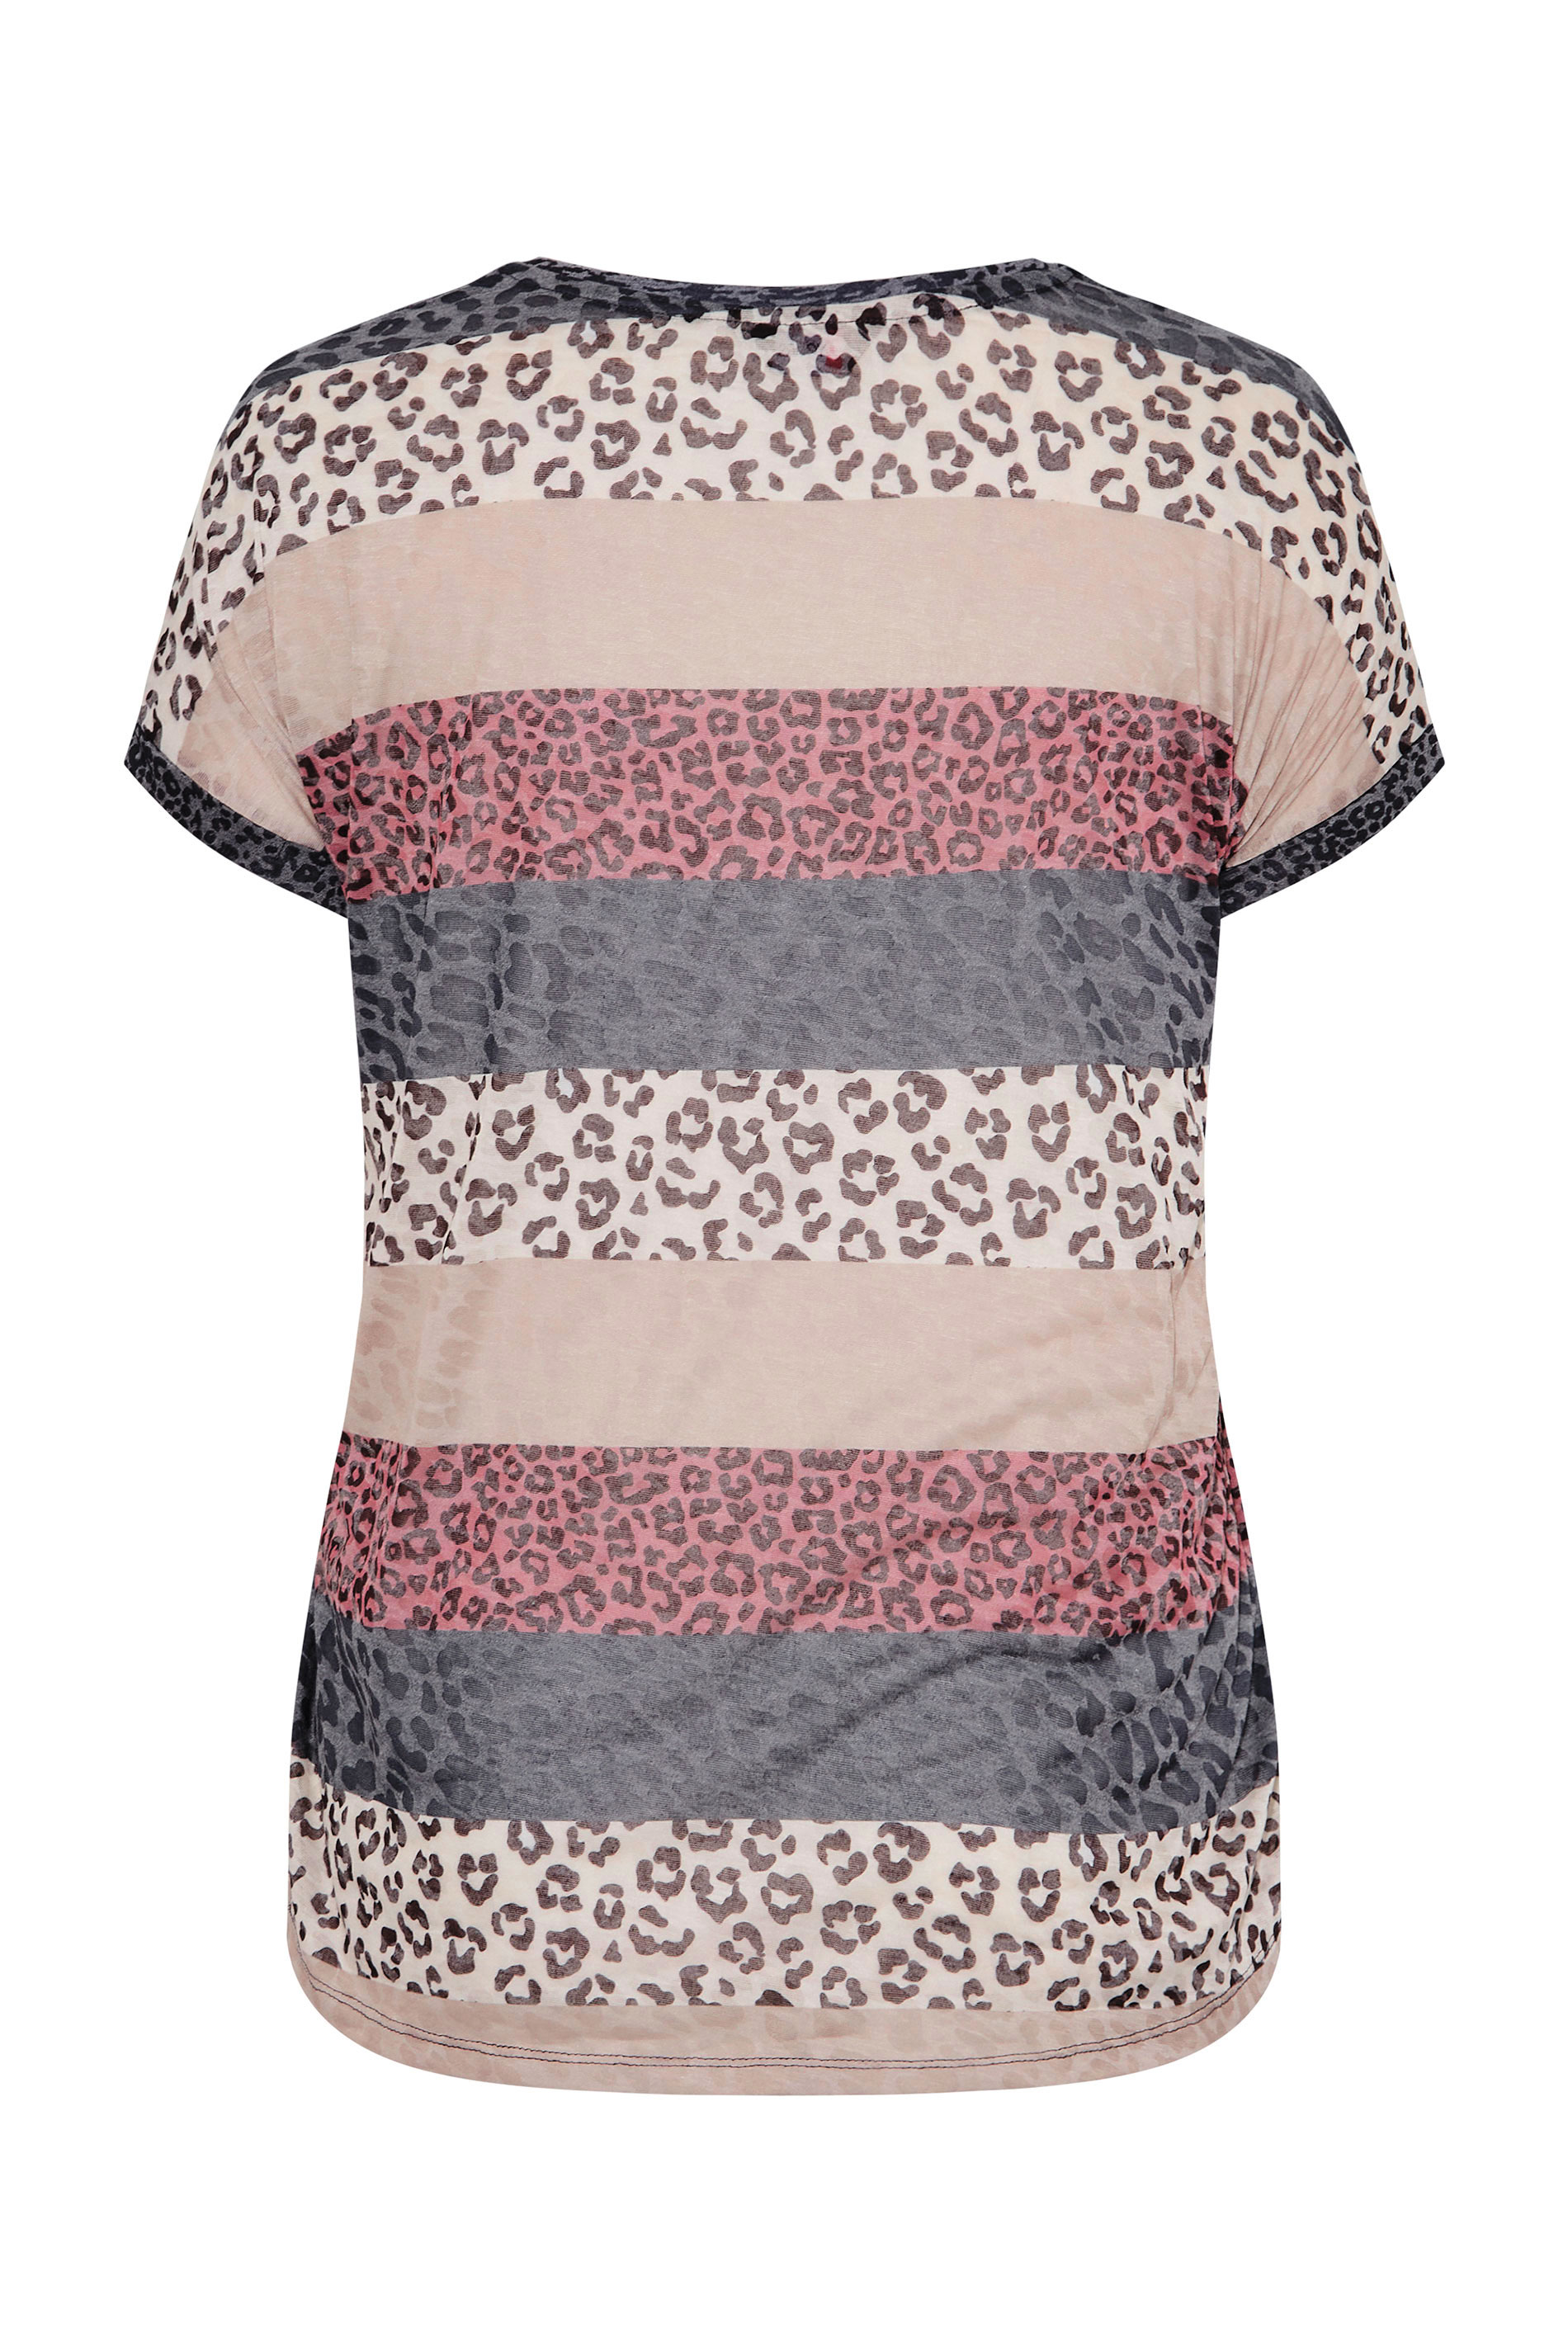 Grande taille  Tops Grande taille  Tops Casual | Top Beige & Marron Rayures Léopard - WD26953